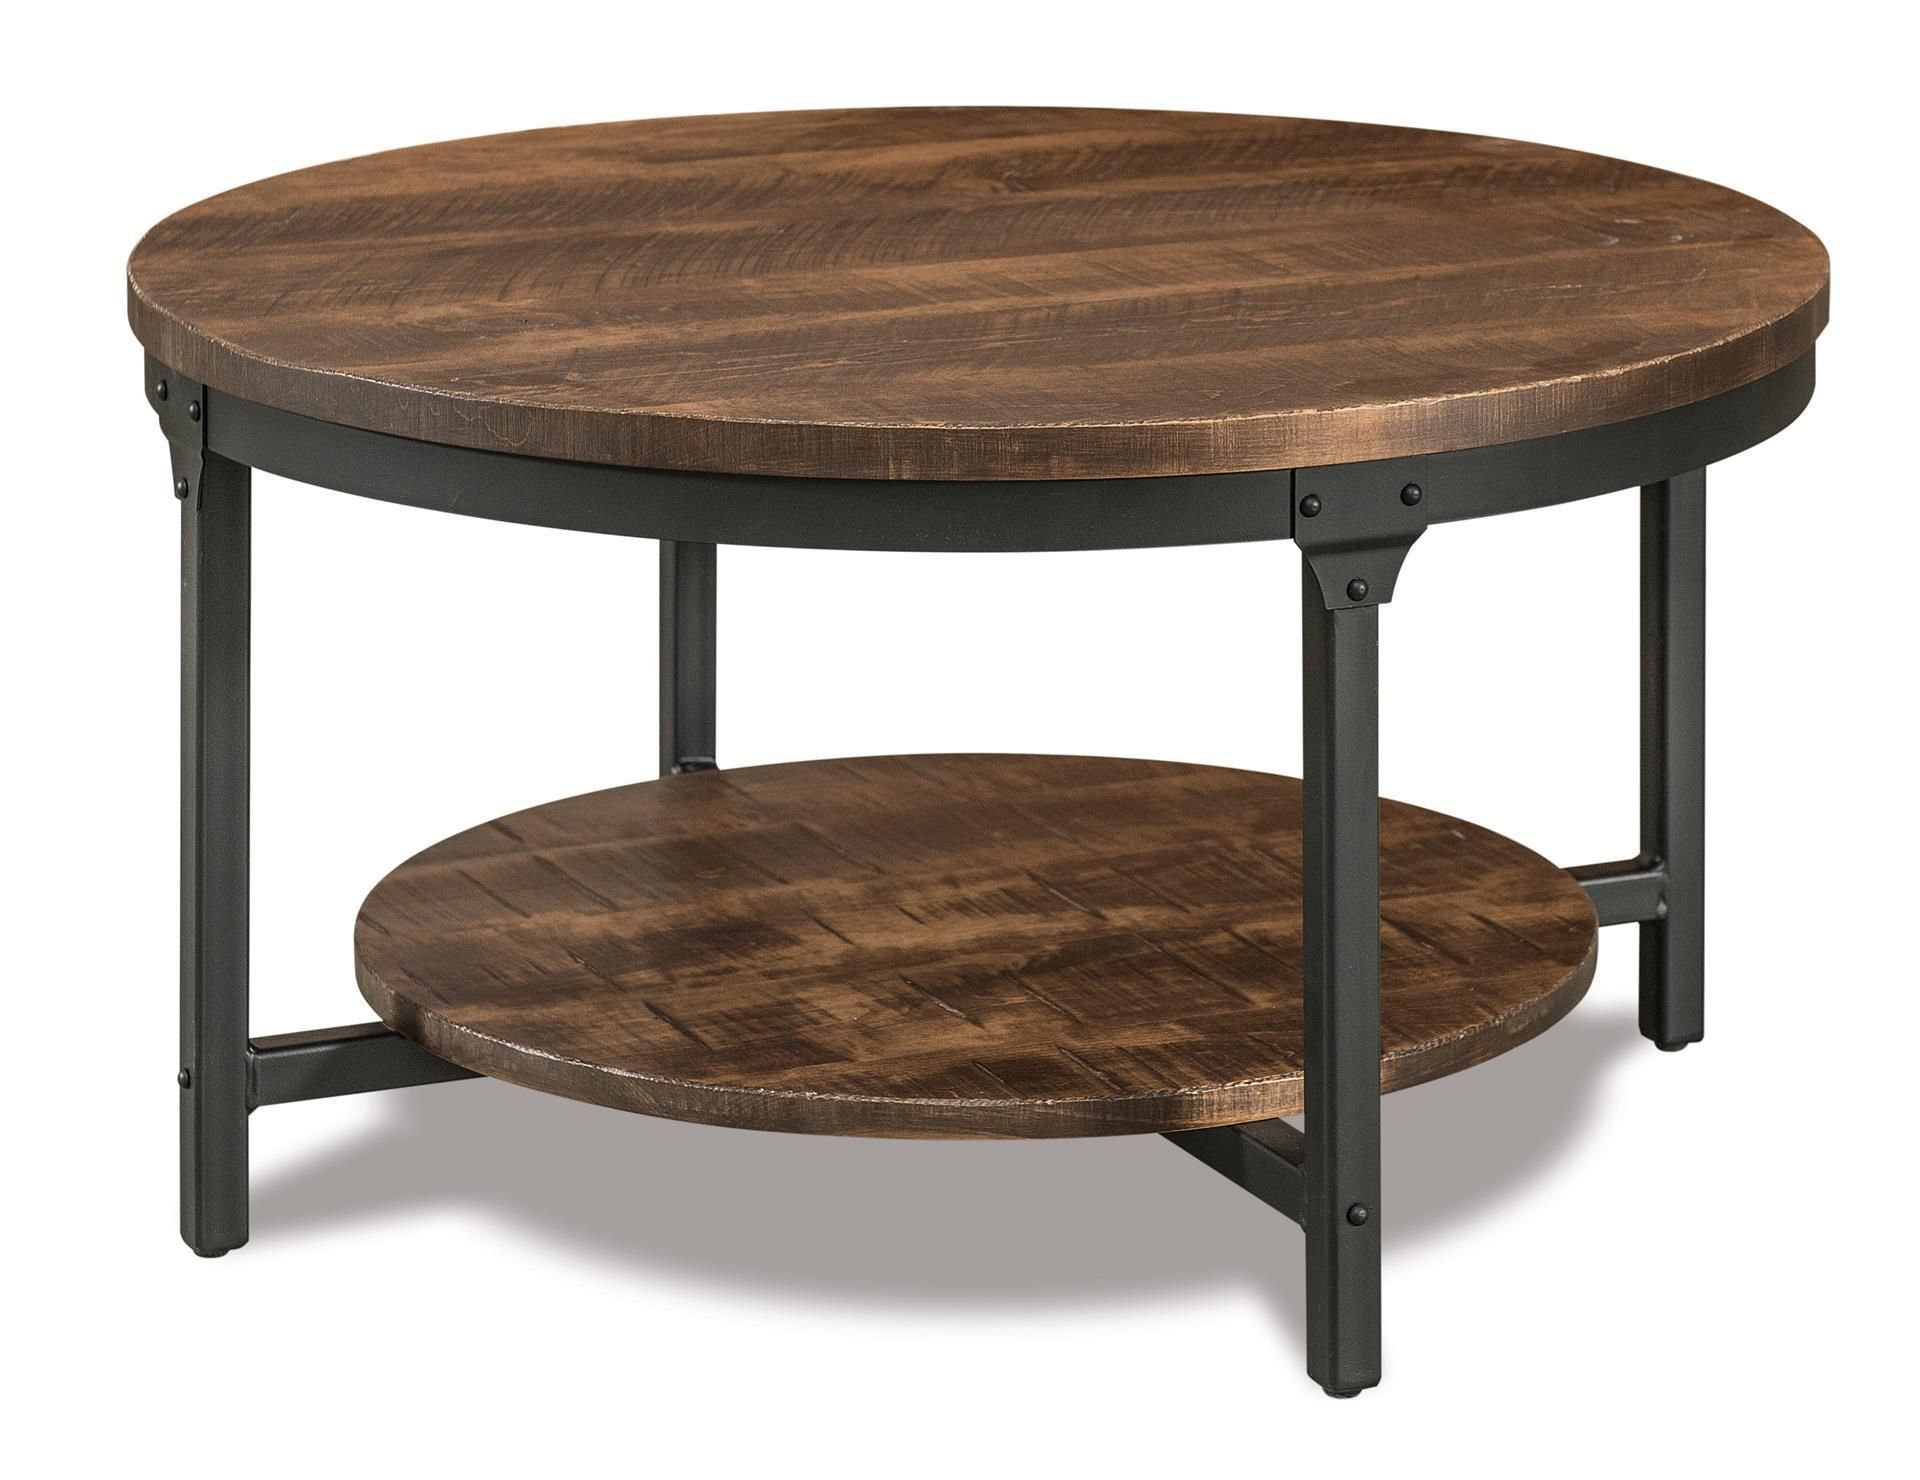 38" Round Rustic Coffee Table From Dutchcrafters Amish Furniture Pertaining To Coffee Tables With Round Wooden Tops (Photo 13 of 15)